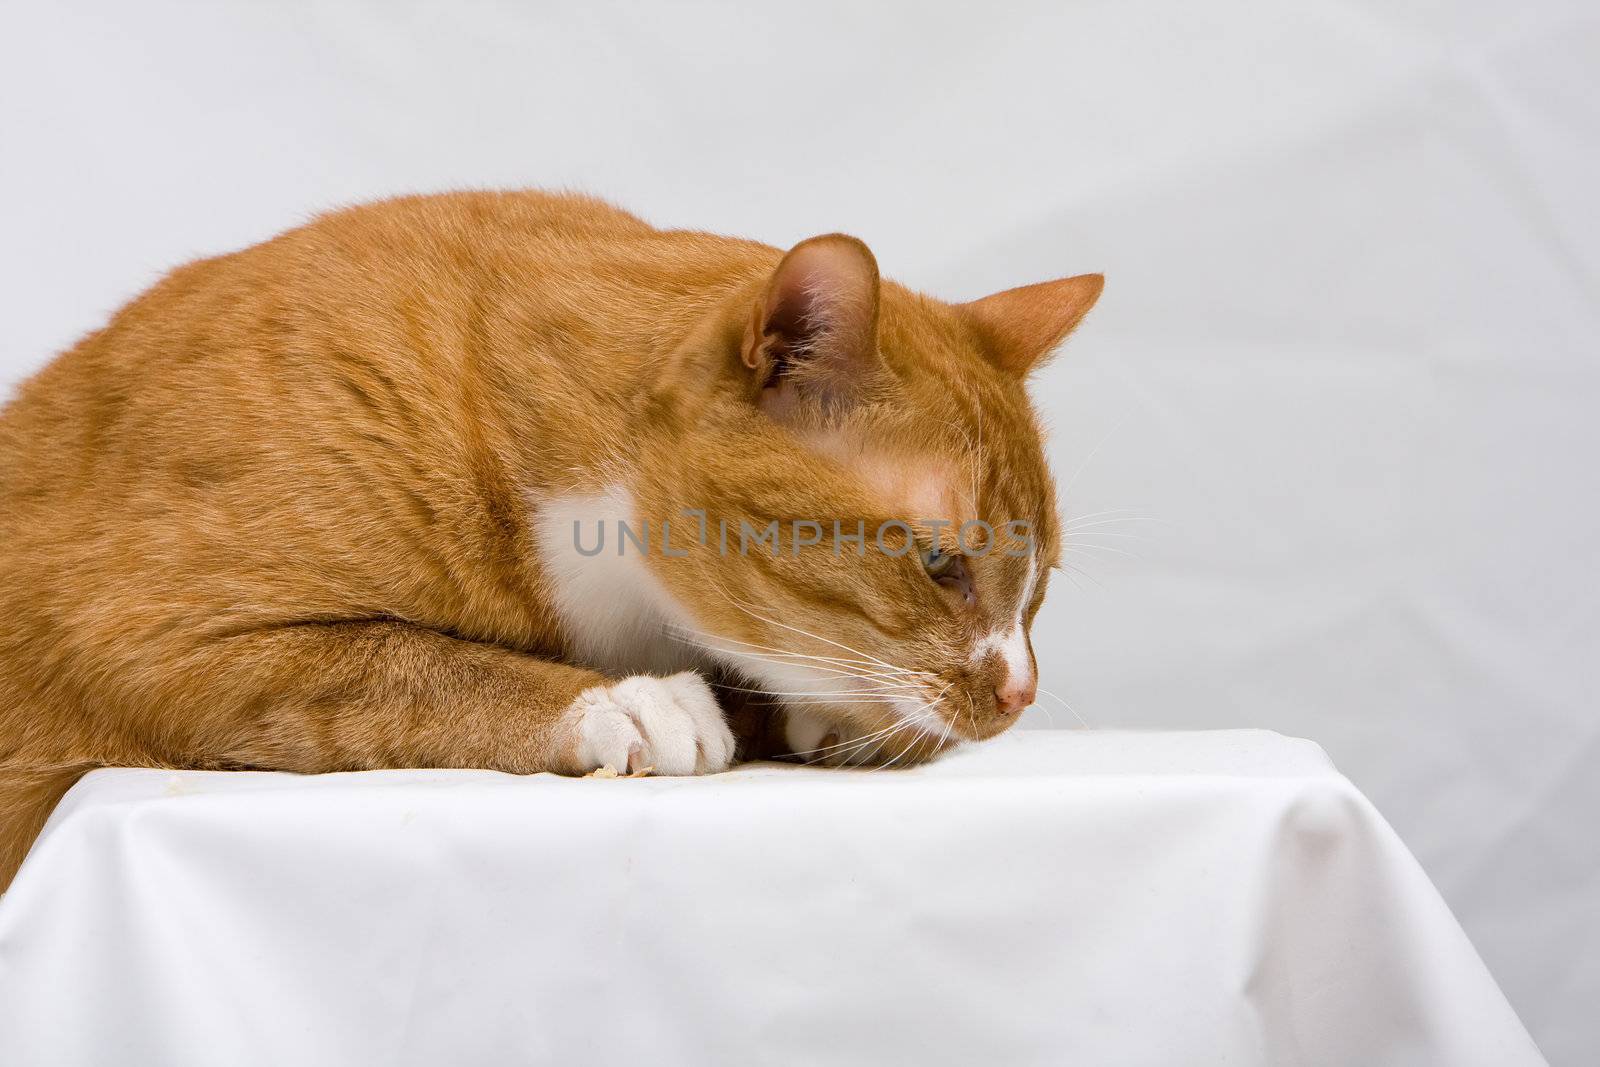 An orange cat curious to see what is on a white table, isolated on white